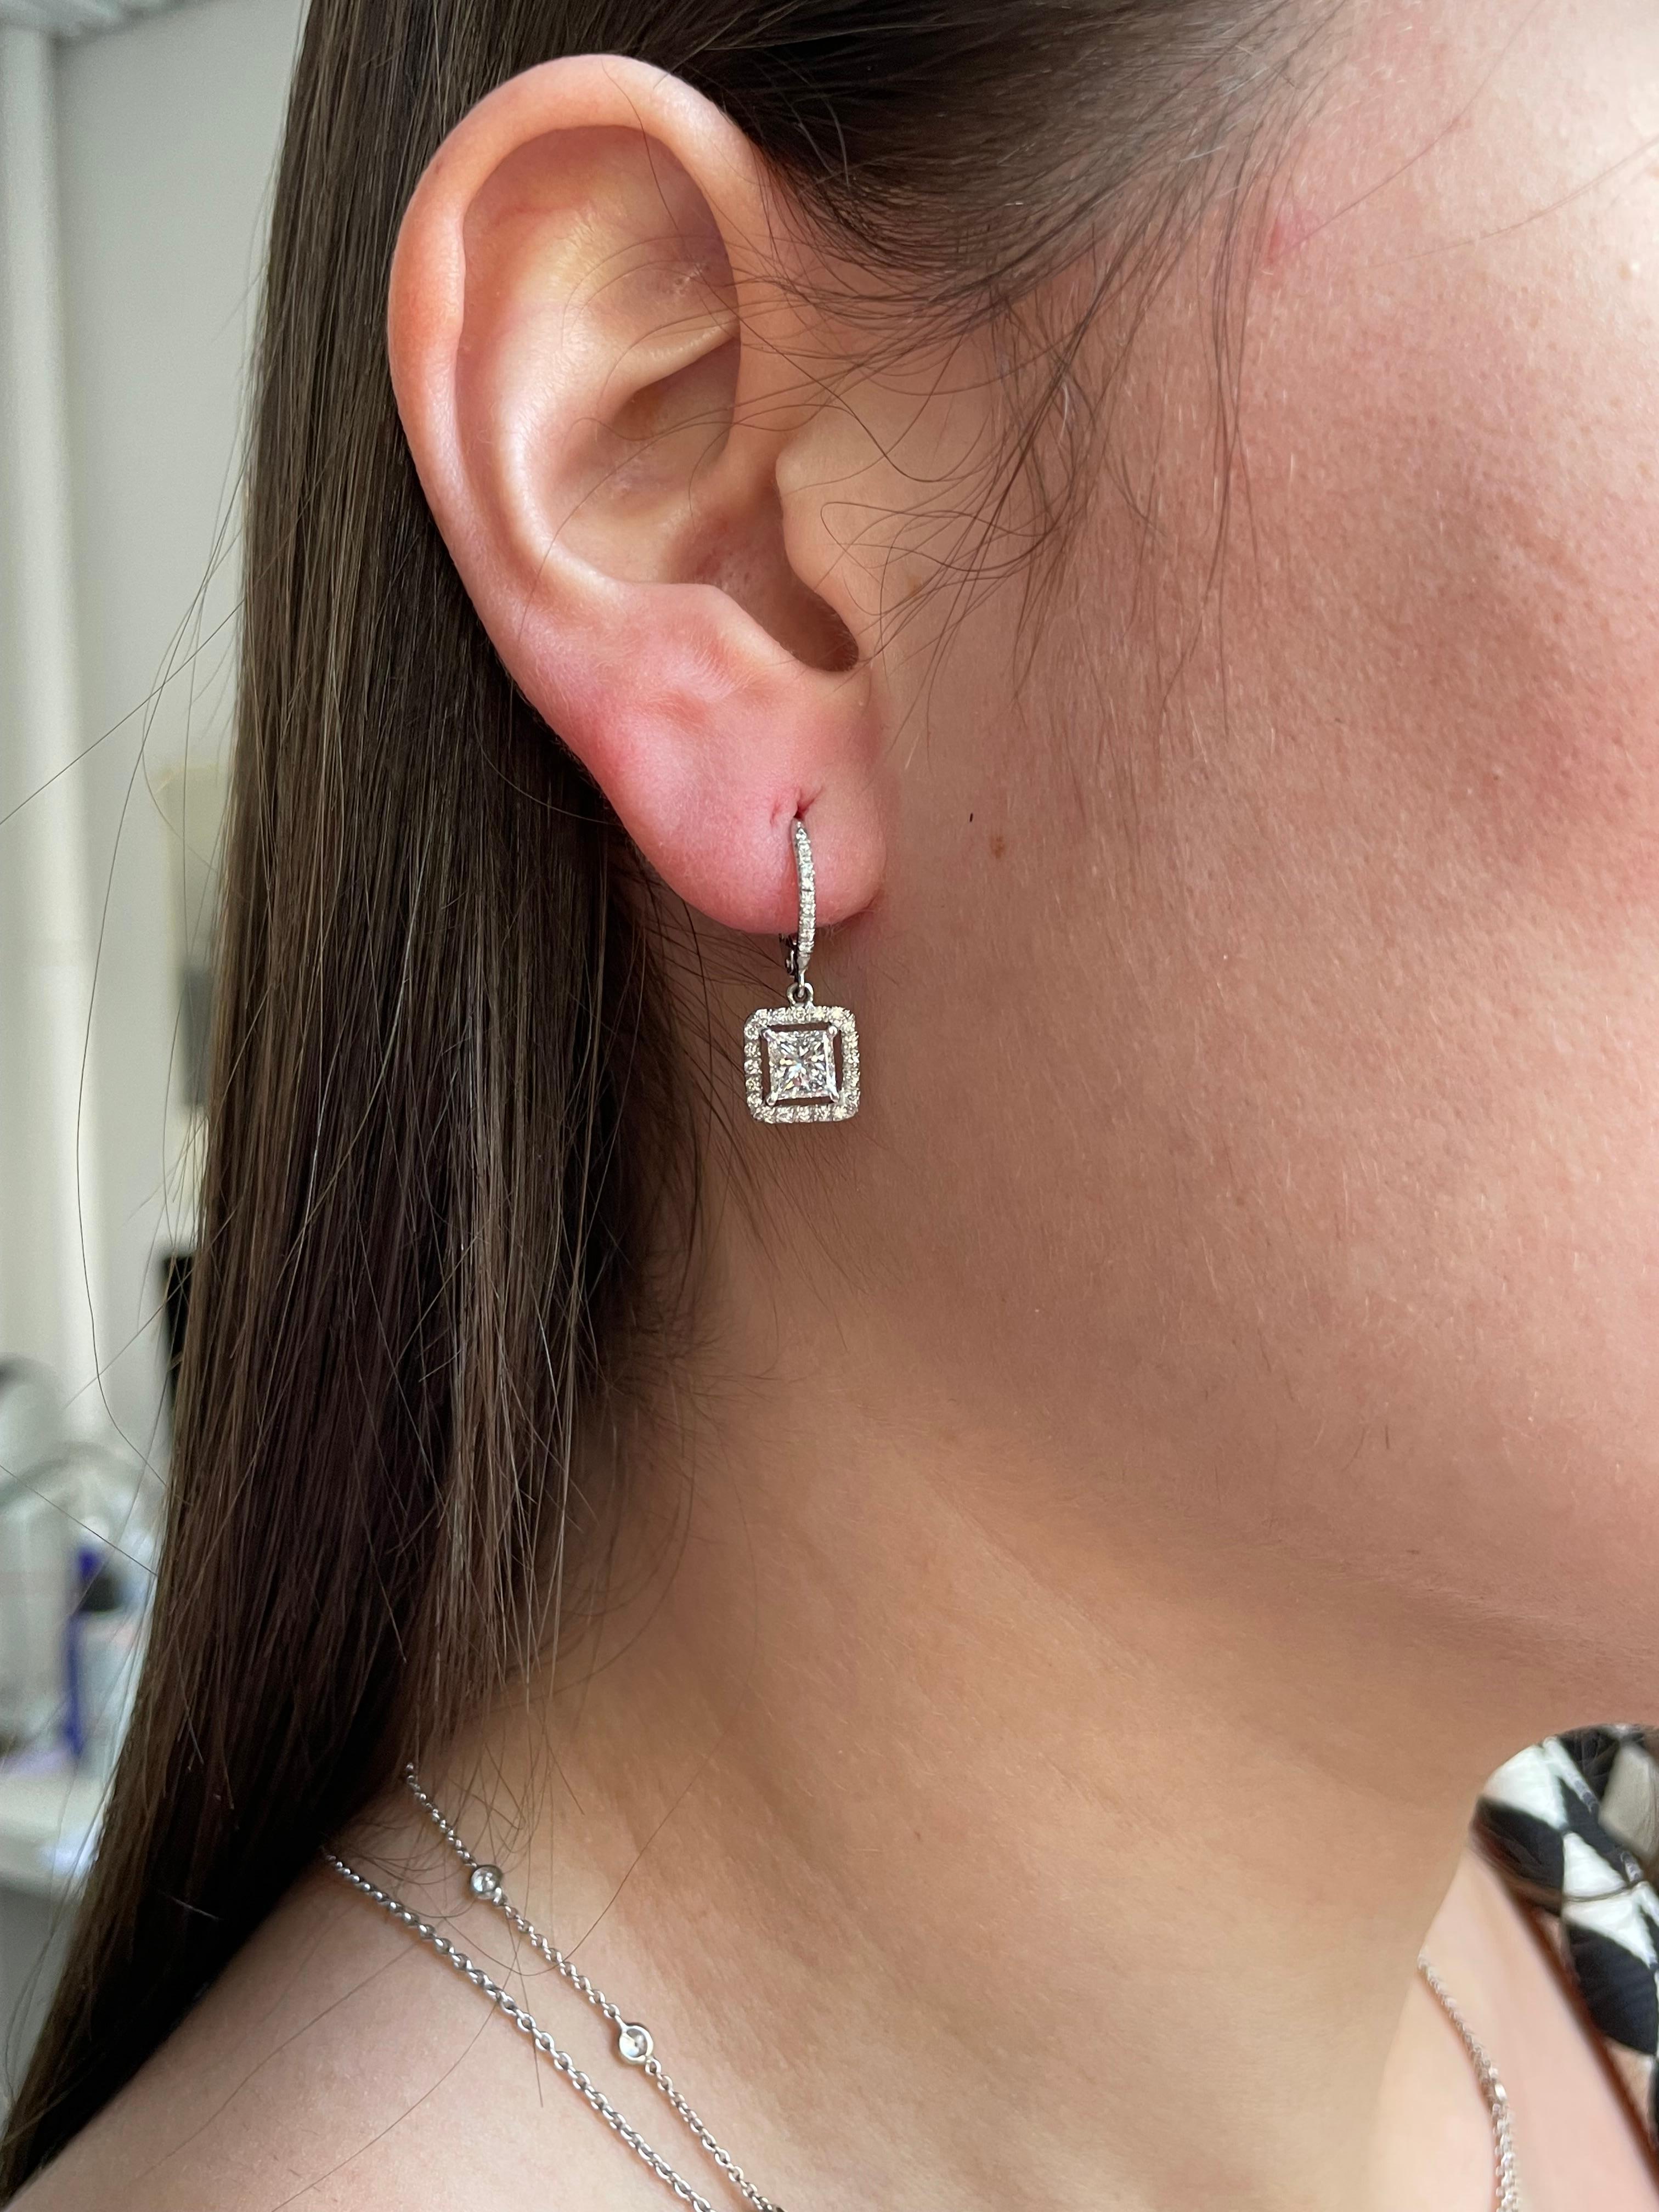 Stunning princess cut dangling earrings. Weighing approximately 1.50 carats these H color and SI clarity diamond earrings have a lever back and will fit any occasion. Each earring has a pave diamond frame and a wire set in 18kt gold. These earrings